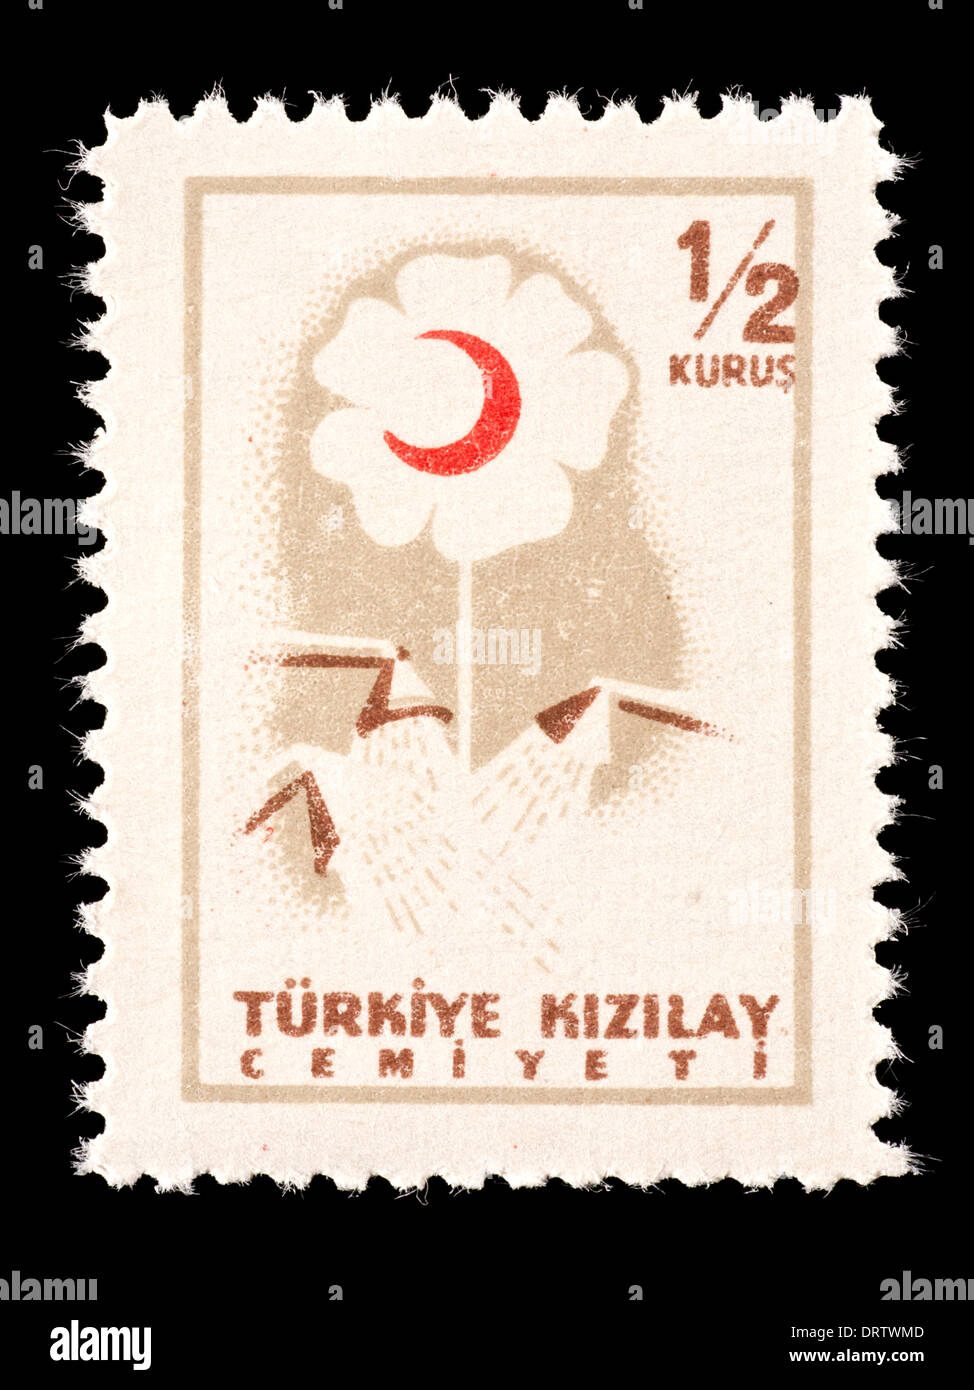 Postal tax stamp from Turkey depicting a flower and red crescent. Stock Photo